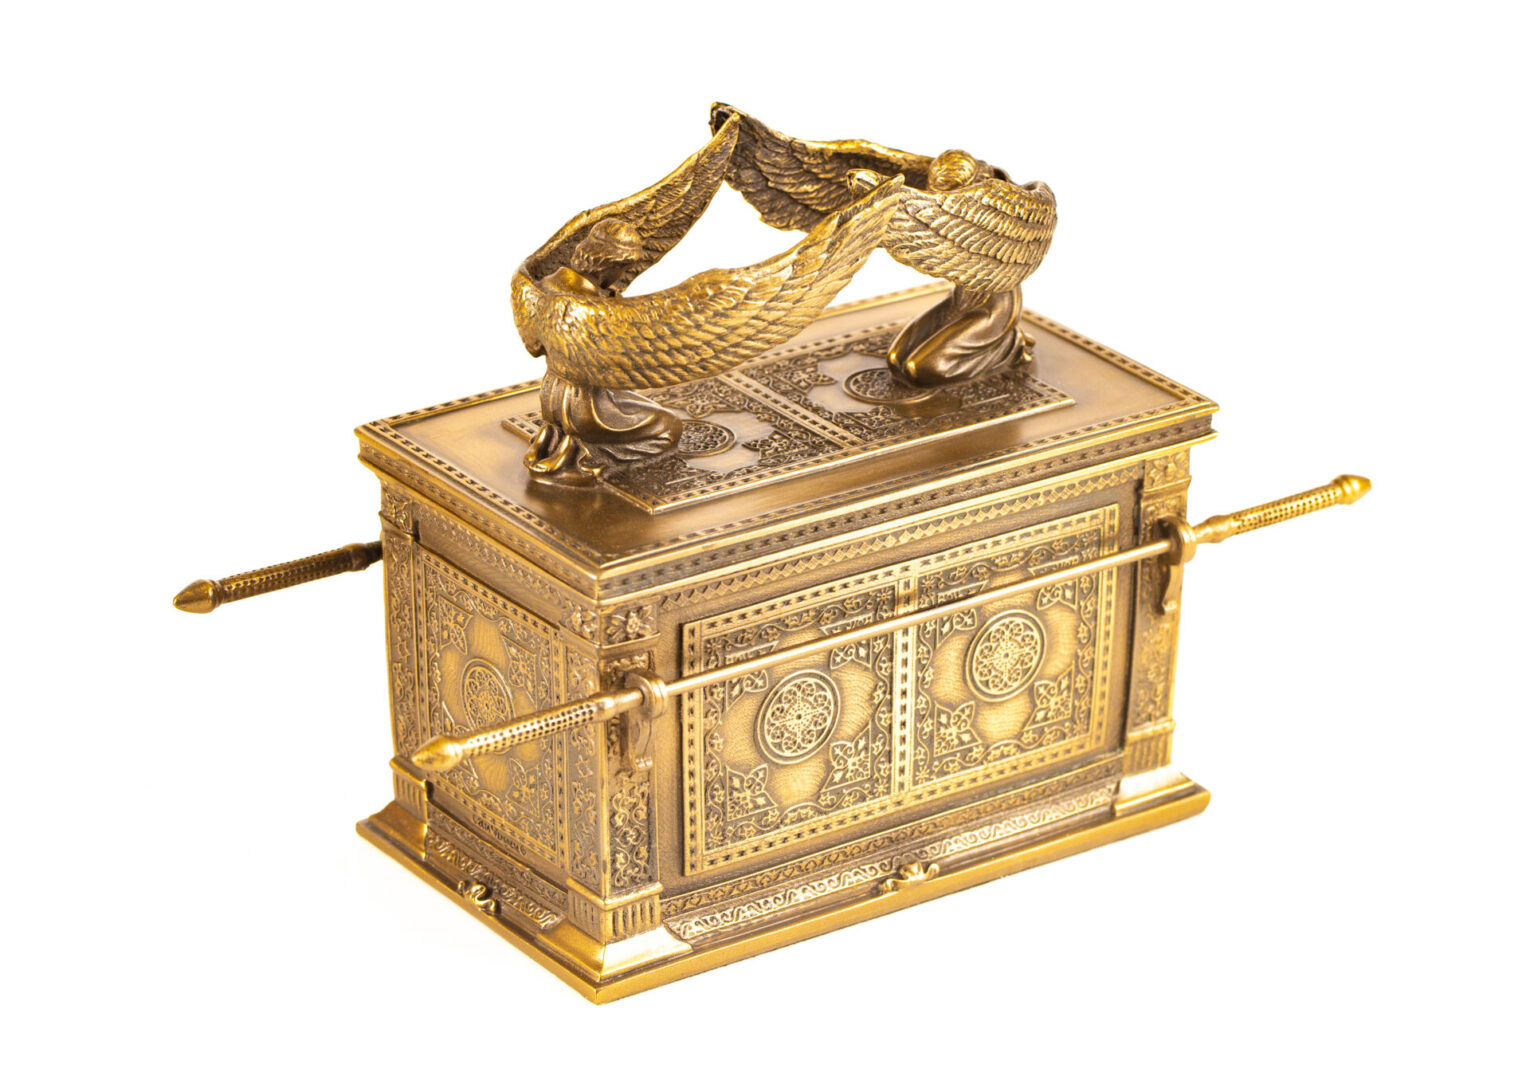 A gold colored box with a handle on top of it.